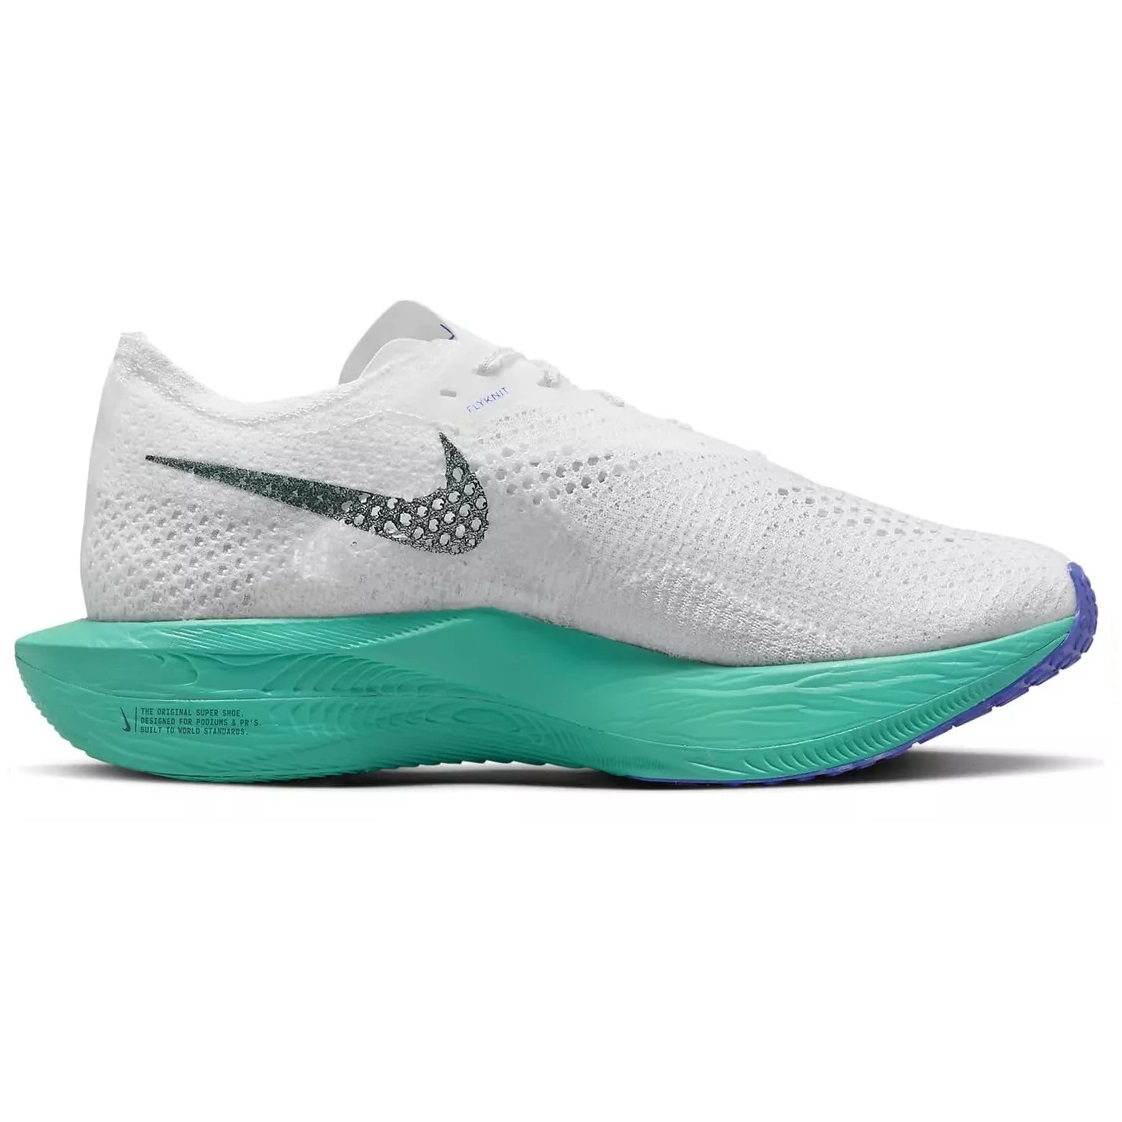 ☆NIKE ZOOMX VAPORFLY NEXT％ 3 白/濃緑/青緑/青 27.5cm ナイキ ズームX ヴェイパーフライ ネクスト％ 3 DV4129-102の画像2